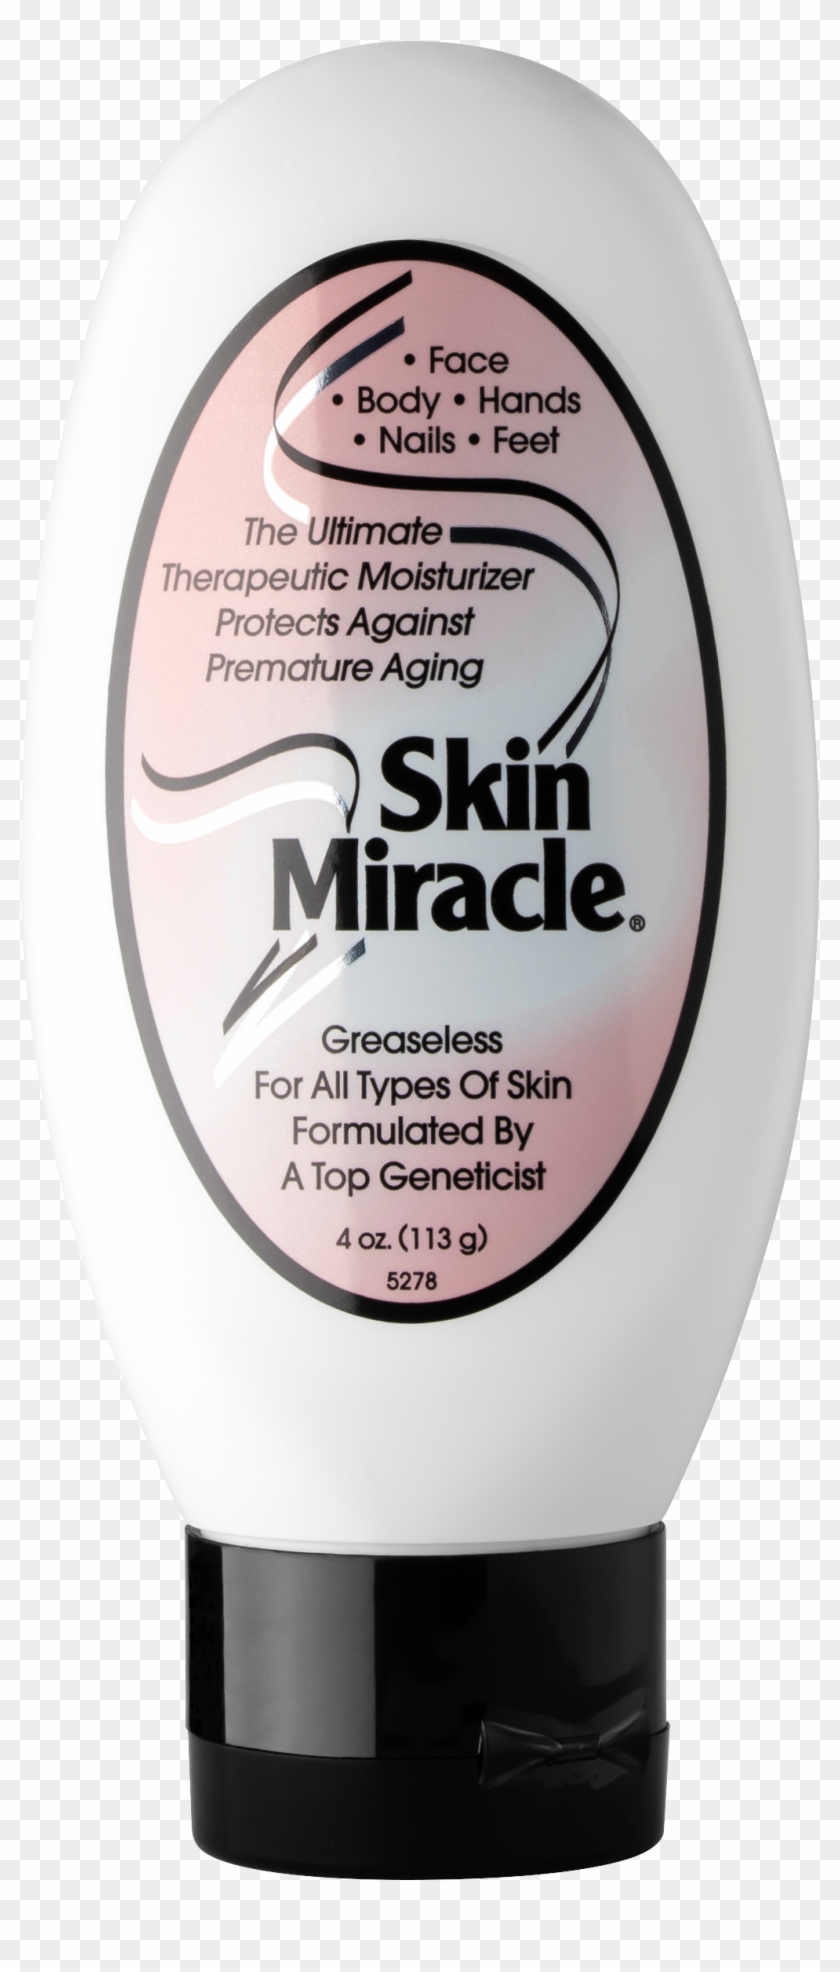 Skin Miracle Is The Ultimate Therapeutic Moisturizer - Eye Shadow Clipart #3798301